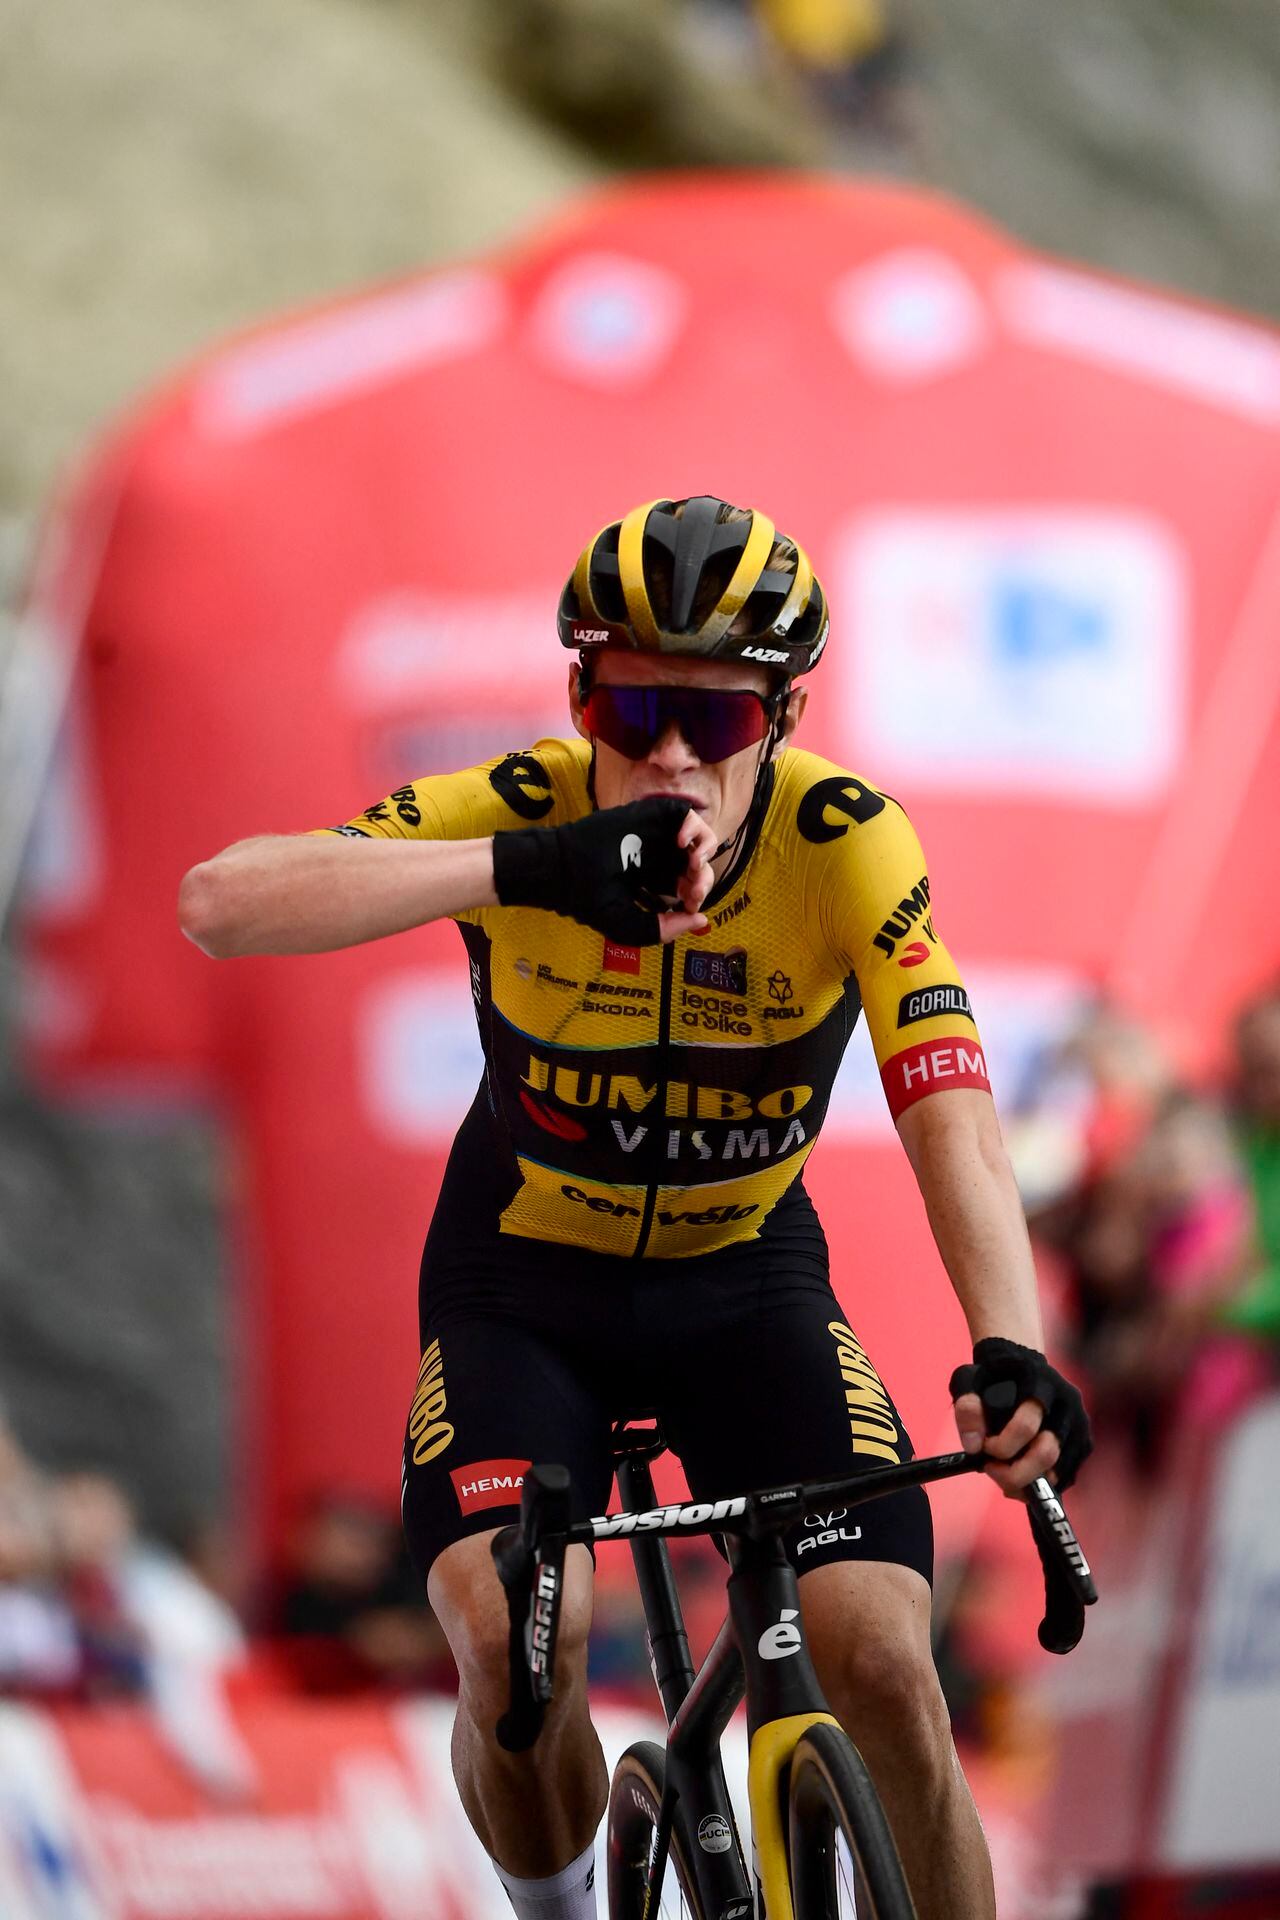 Team Jumbo-Visma's Danish rider Jonas Vingegaard celebrates winning in the stage 13 of the 2023 La Vuelta cycling tour of Spain, a 134,7 km race between Formigal and the Col du Tourmalet in France, on September 8, 2023. (Photo by ANDER GILLENEA / AFP)